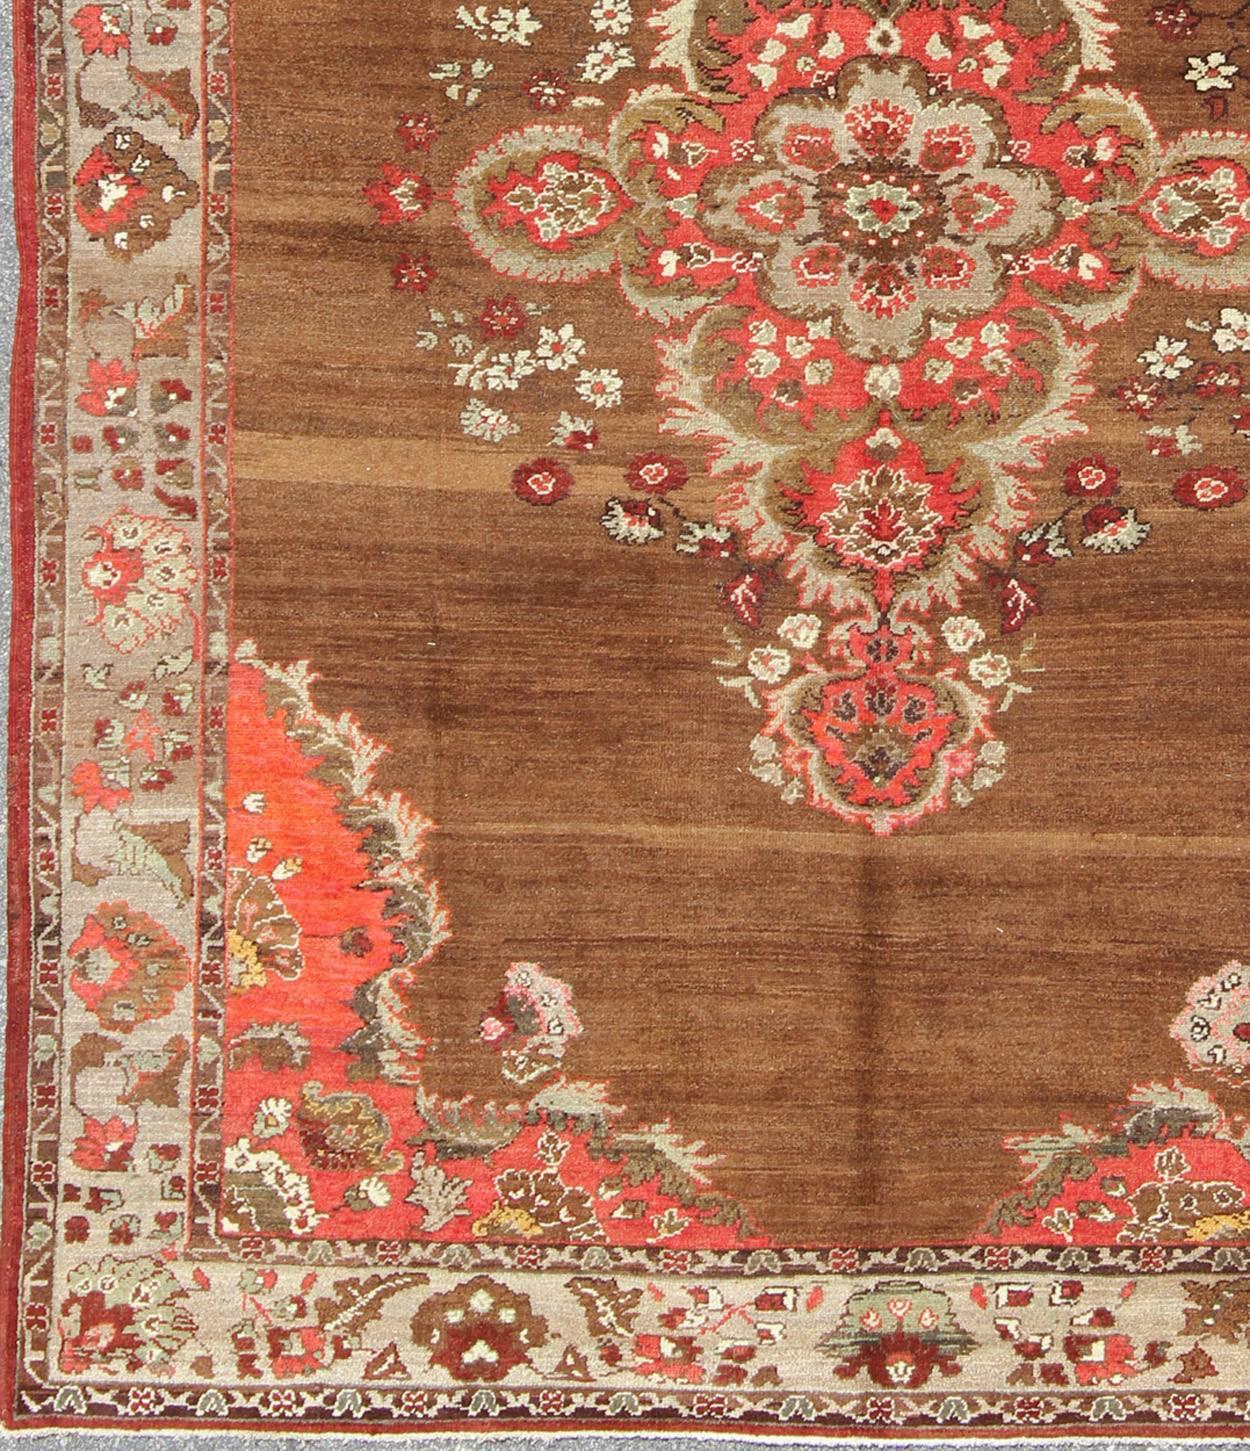 This very unique carpet, from eastern Turkey, displays a brown background with a gray/taupe border. The orange corners add vibrancy to the rug while the softer colors, such as taupe, gray, pale green and cream, calm the vibrant and bold nature of